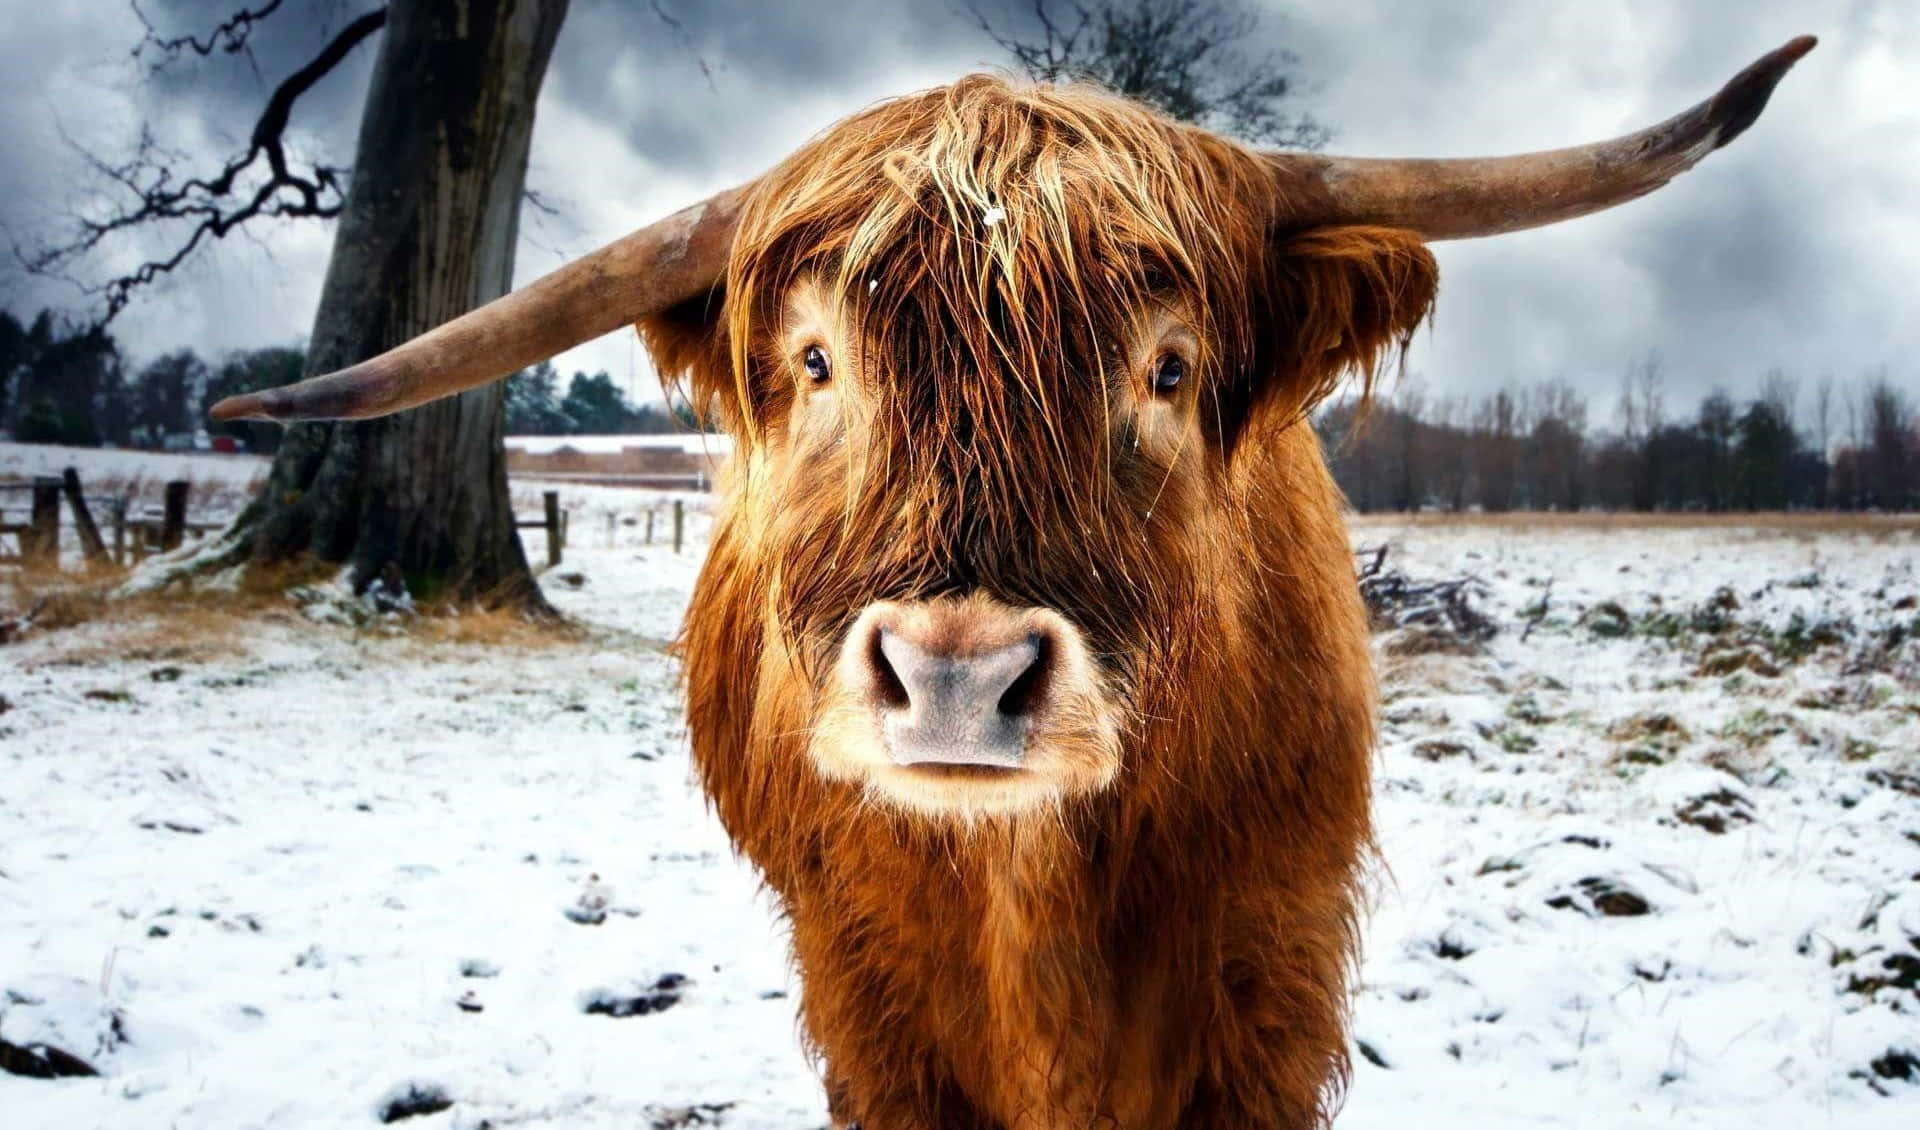 Caption: Majestic Highland Cow in Natural Scenery